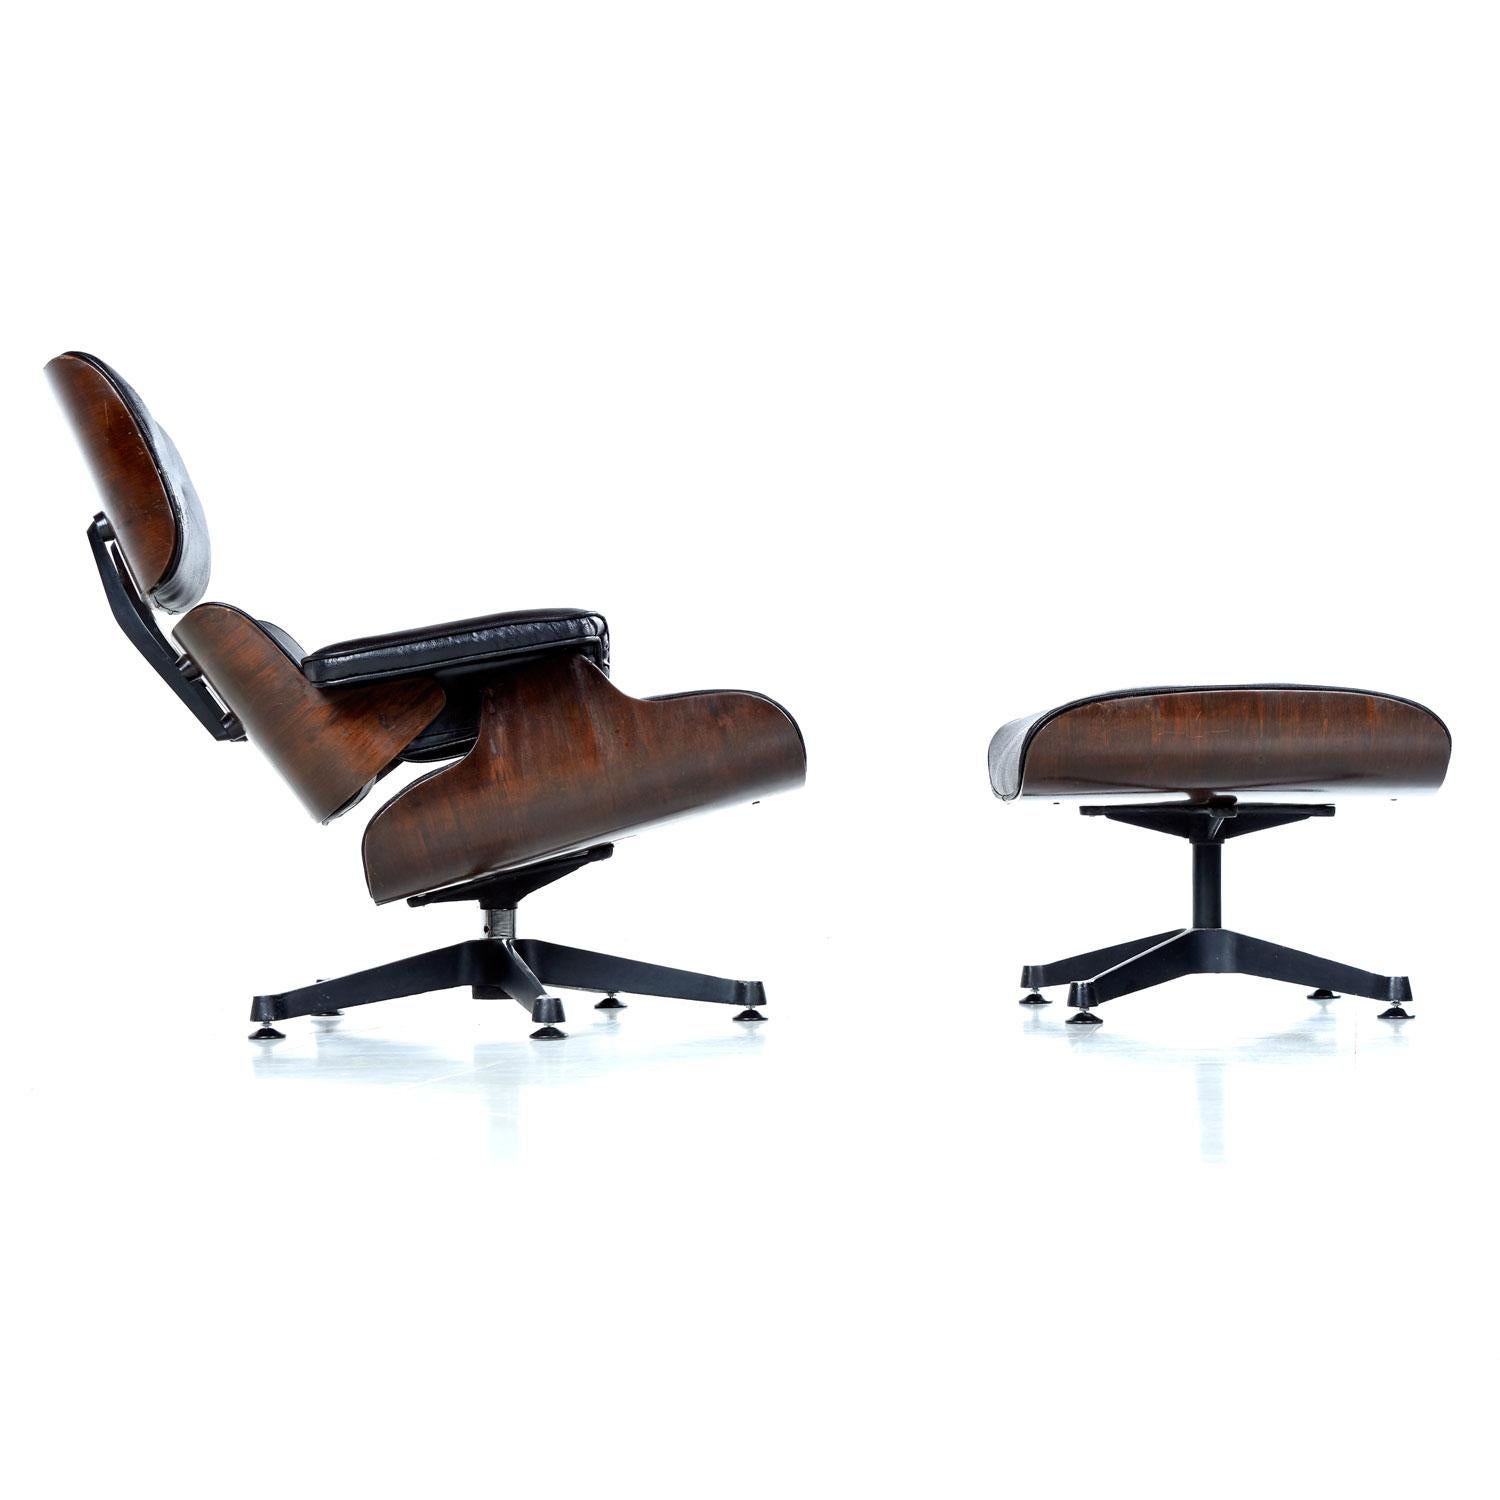 Sold as a pair. This set of vintage Eames lounge / ottoman replicas has an uncanny and unique history. We purchased from the original owners who actually had these commissioned while stationed overseas in Singapore in the 1970s. In hindsight, we